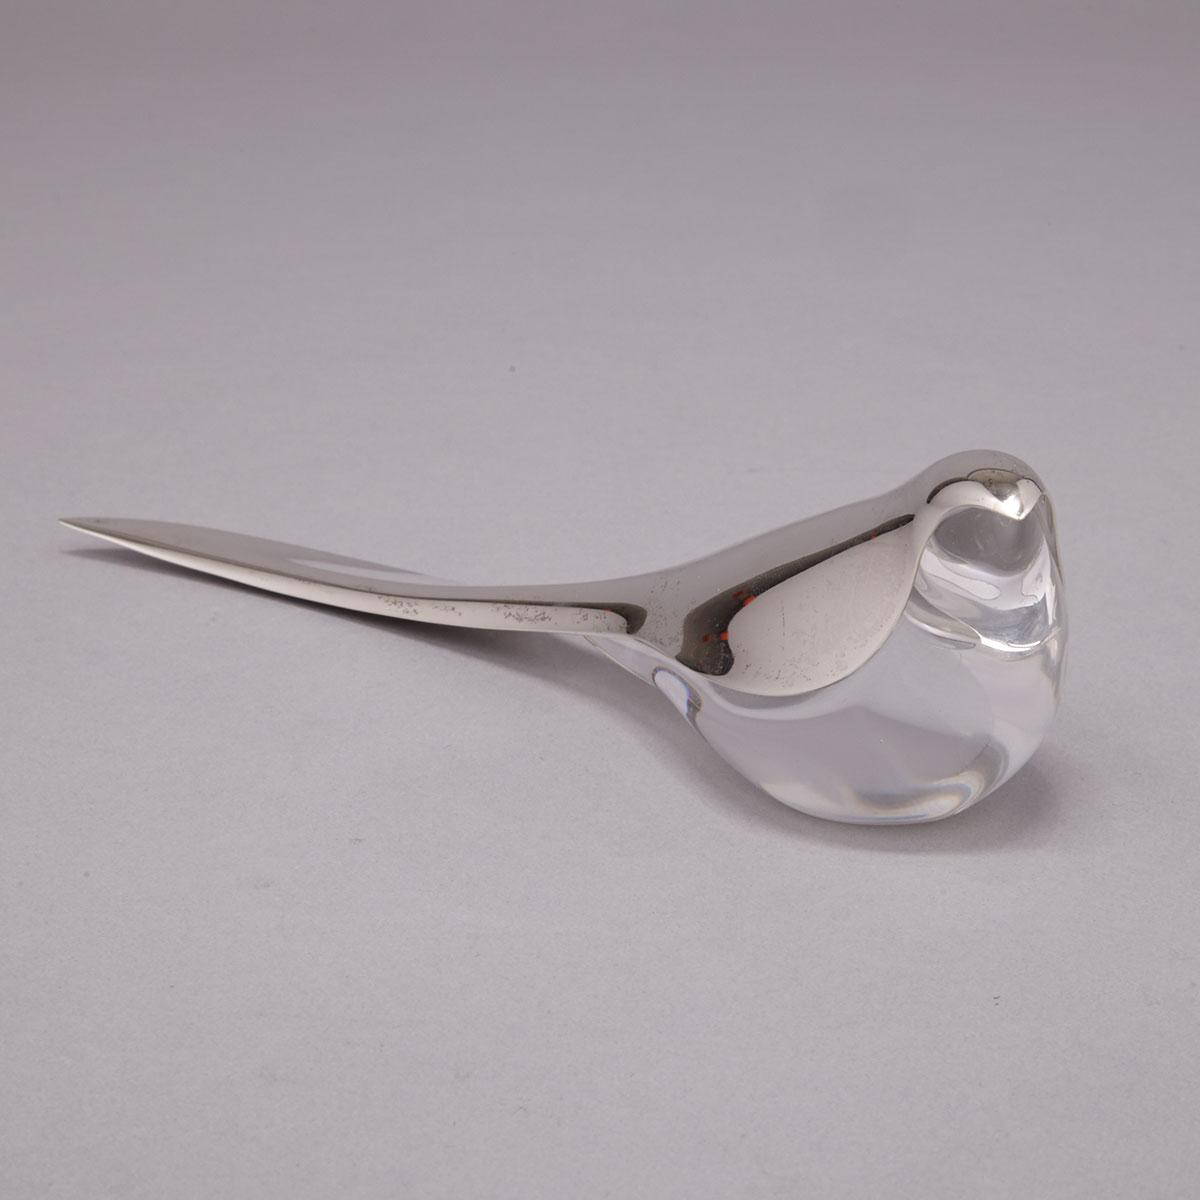 Danish Silver and Glass Wagtail Letter Opener/Paperweight, #485, Allan Scharff for Georg Jensen, late 20th century